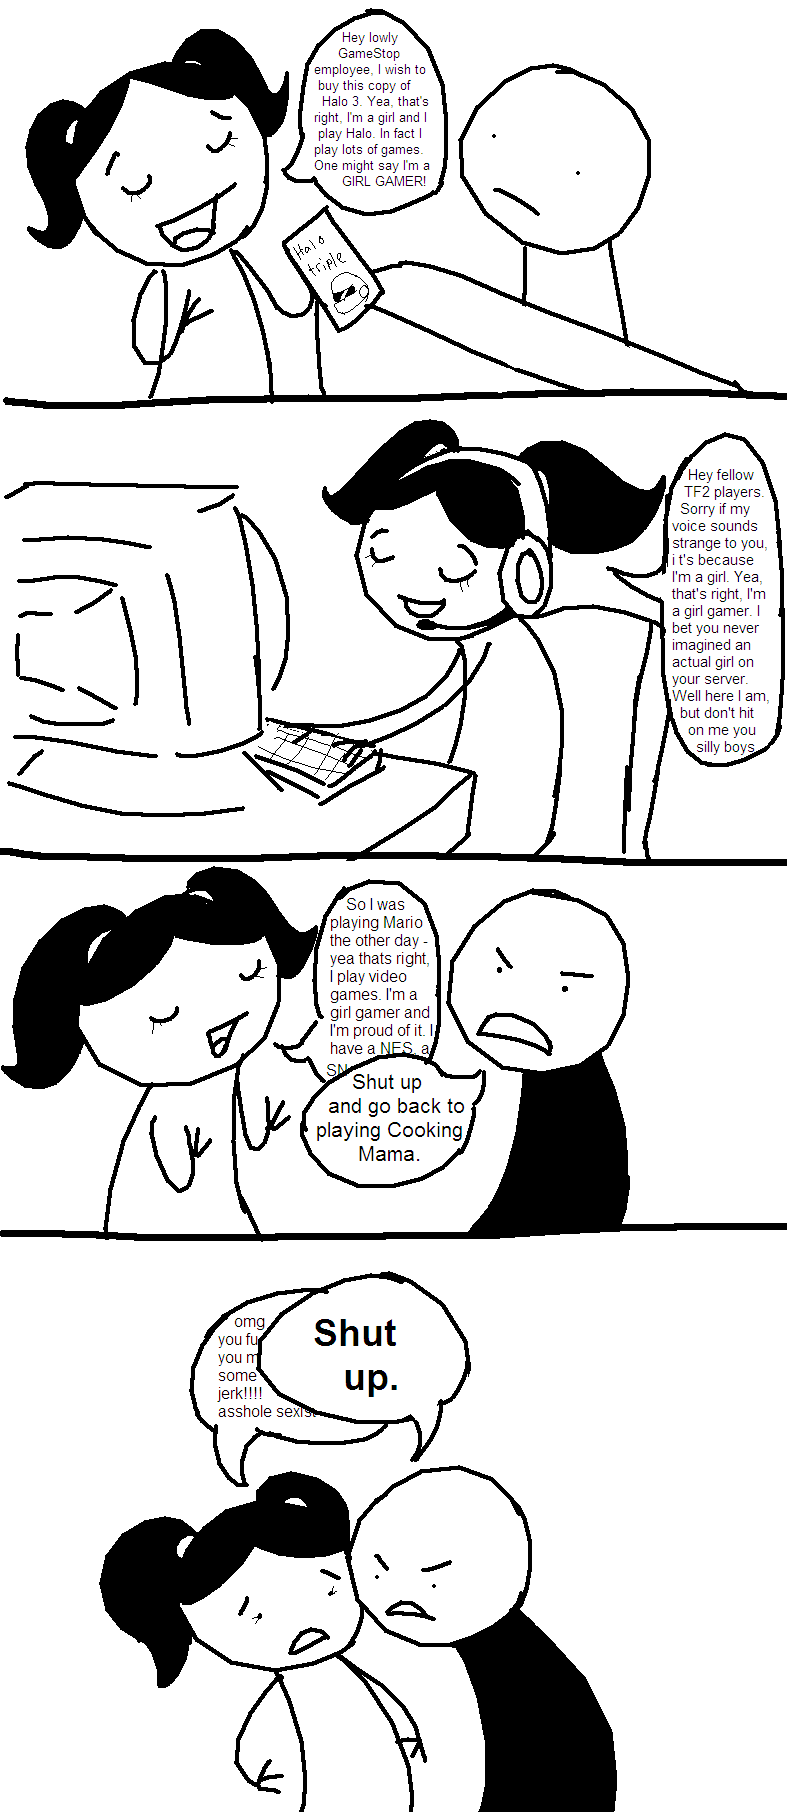 Girl_Gamers_by_FizTheAncient.png